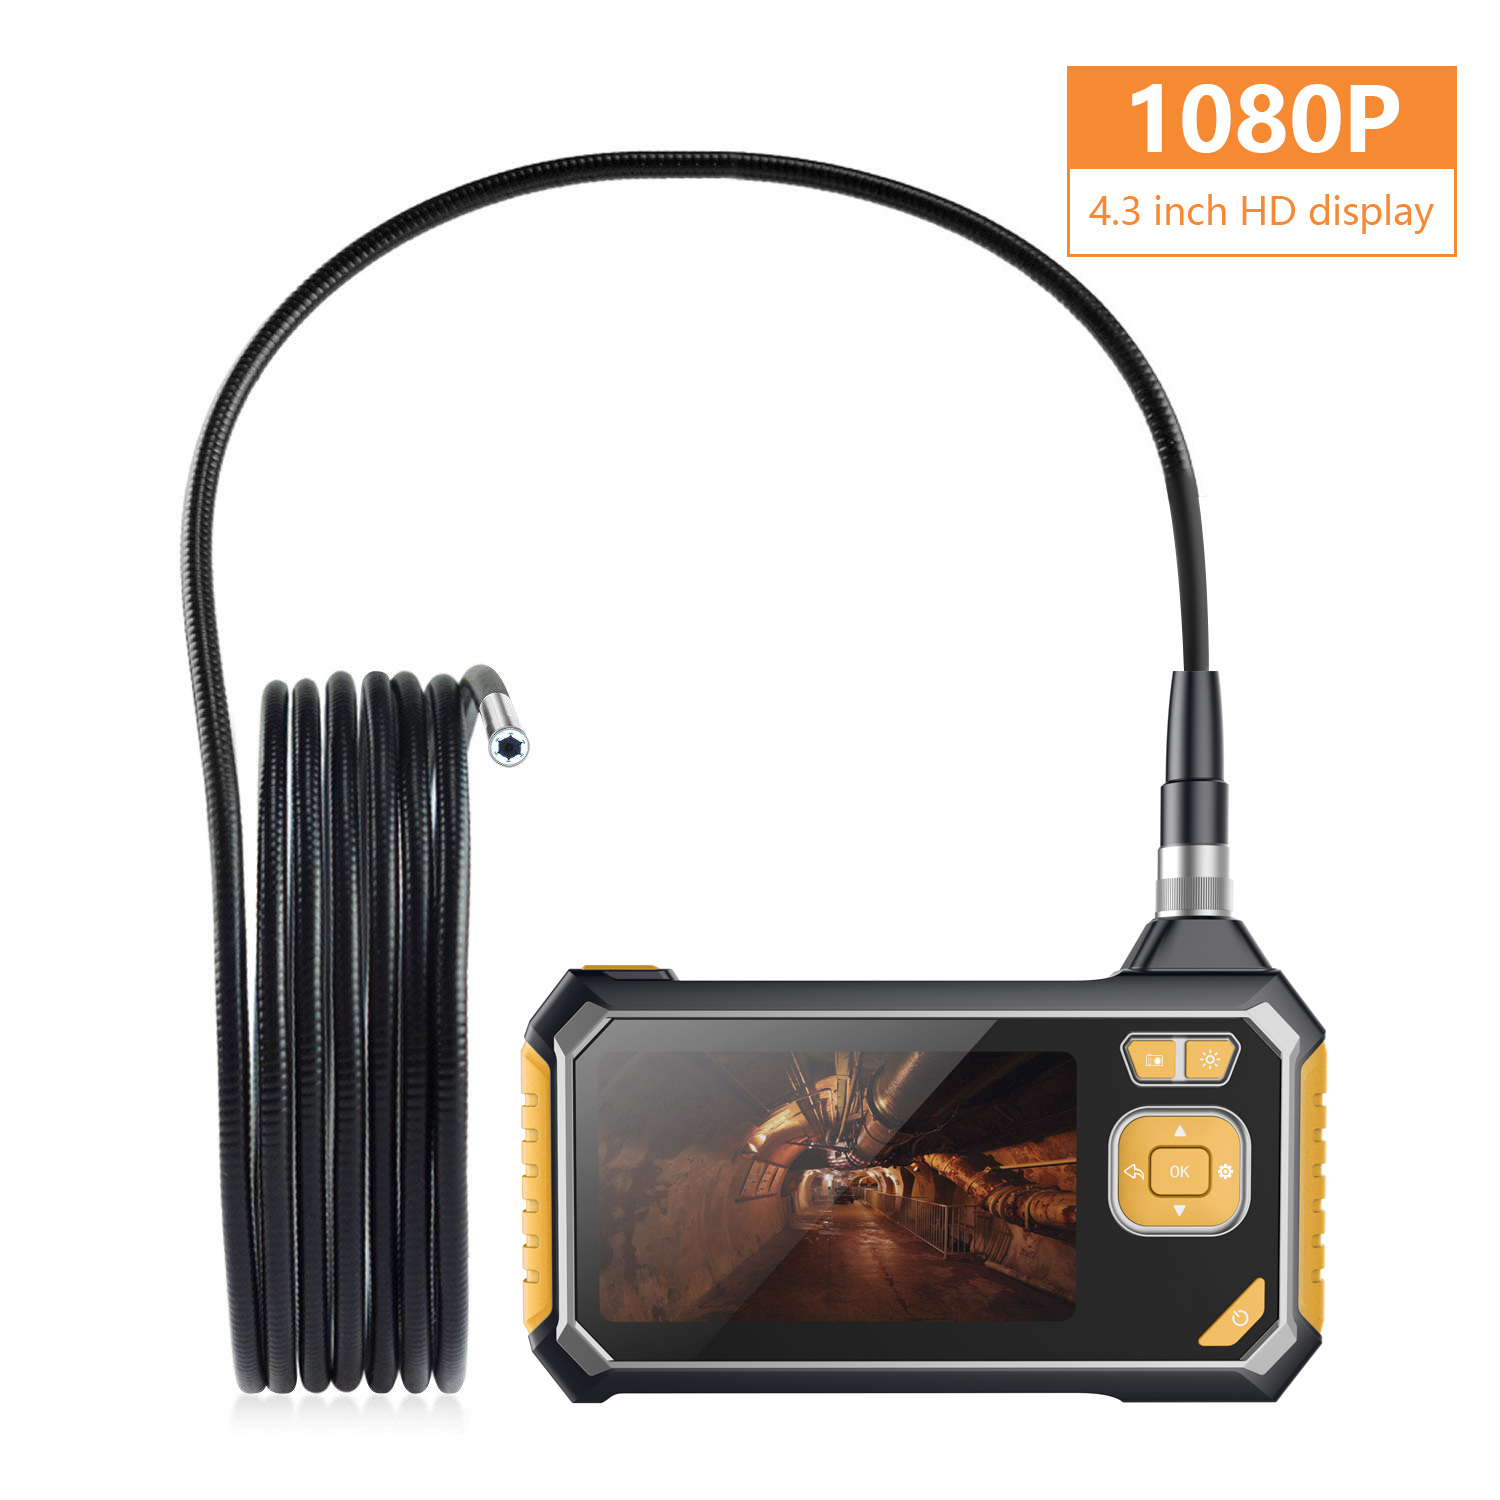 2019 The Best Quality Cheap ROTEK Industrial Endoscope, Inspection Camera 4.3 Inch Color LCD Screen, Semi-rigid Handheld Video Borescope HD1080P with 6 LED, Waterproof Snake Camera with 2600mah Lithium Battery - 5 Meter Made In China Factory 